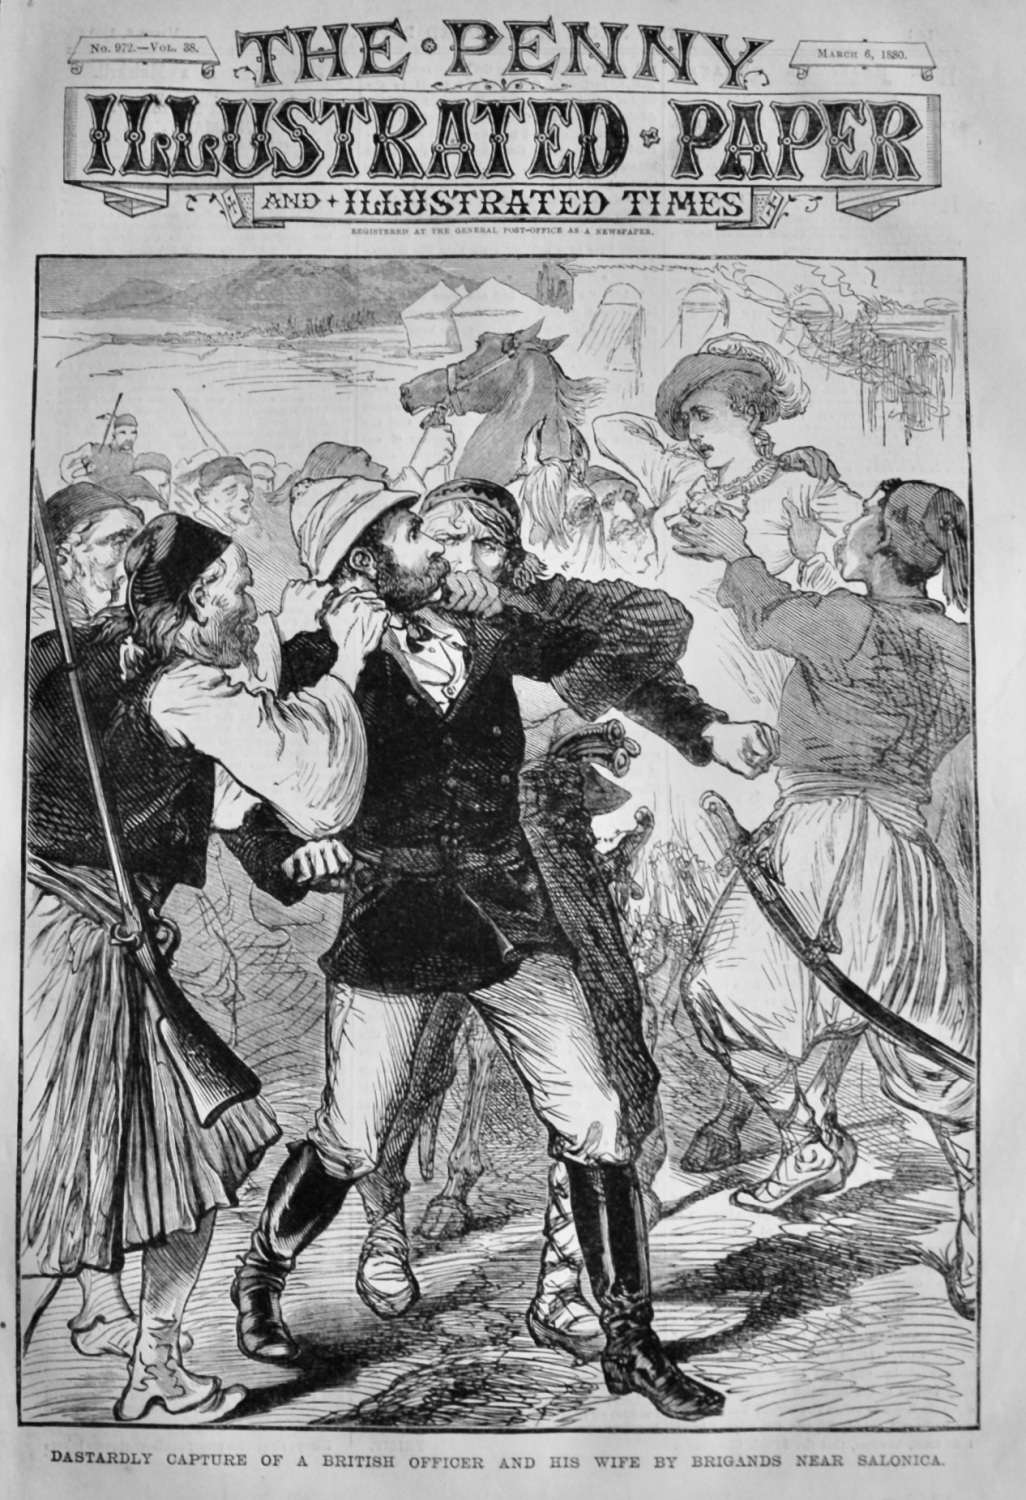 Dastardly Capture of a British Officer and his Wife by Brigands near Saloni